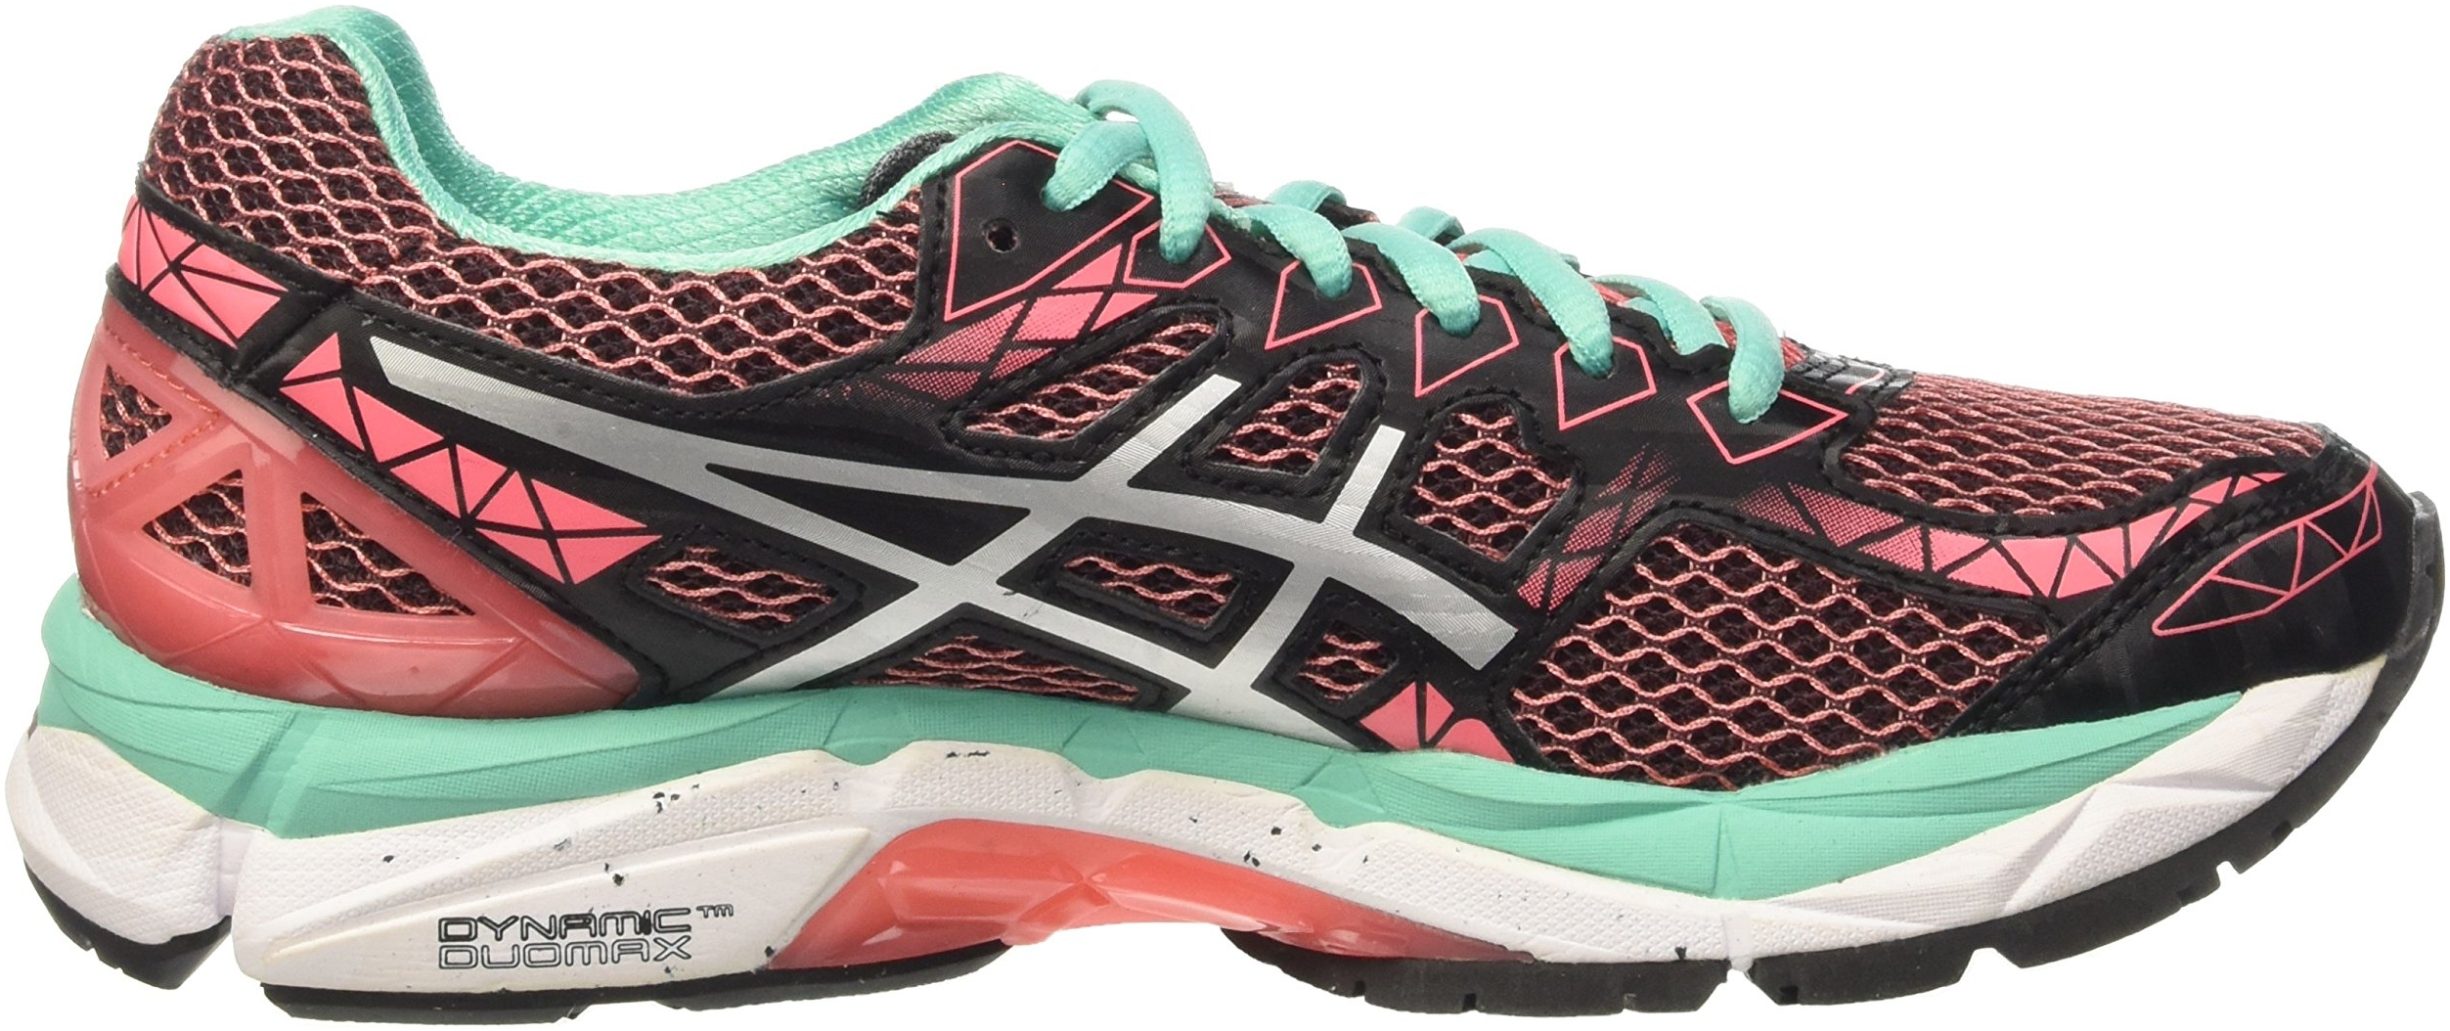 asics running shoes multicolor